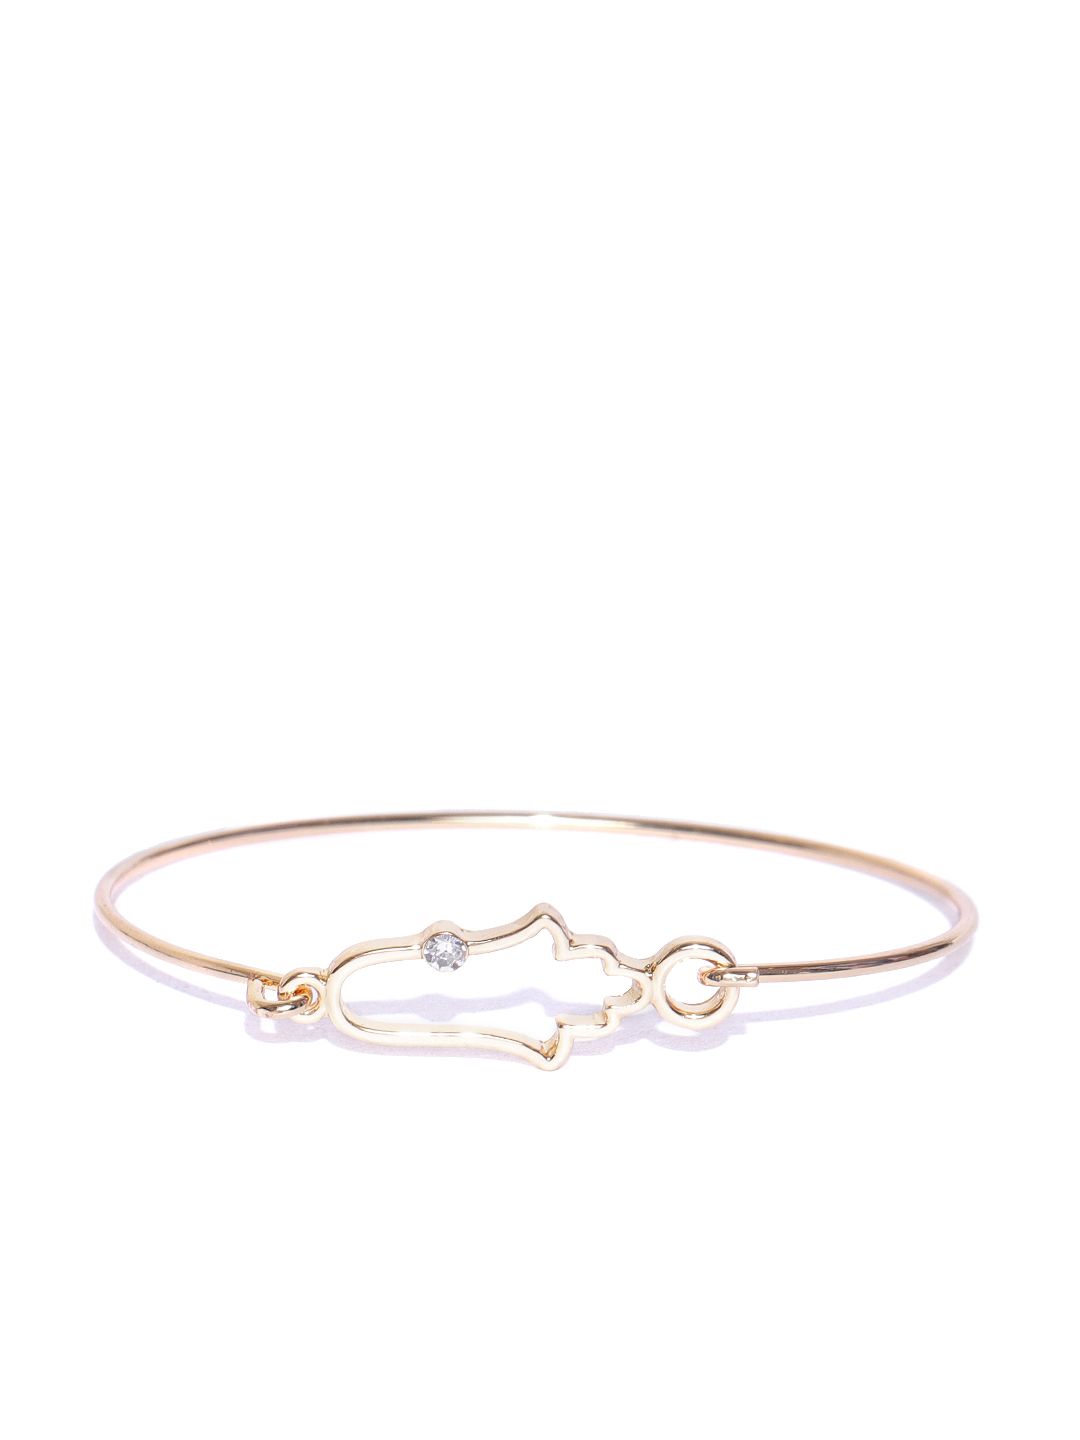 KARATCART Gold-Plated Bangle-Style Bracelet Price in India